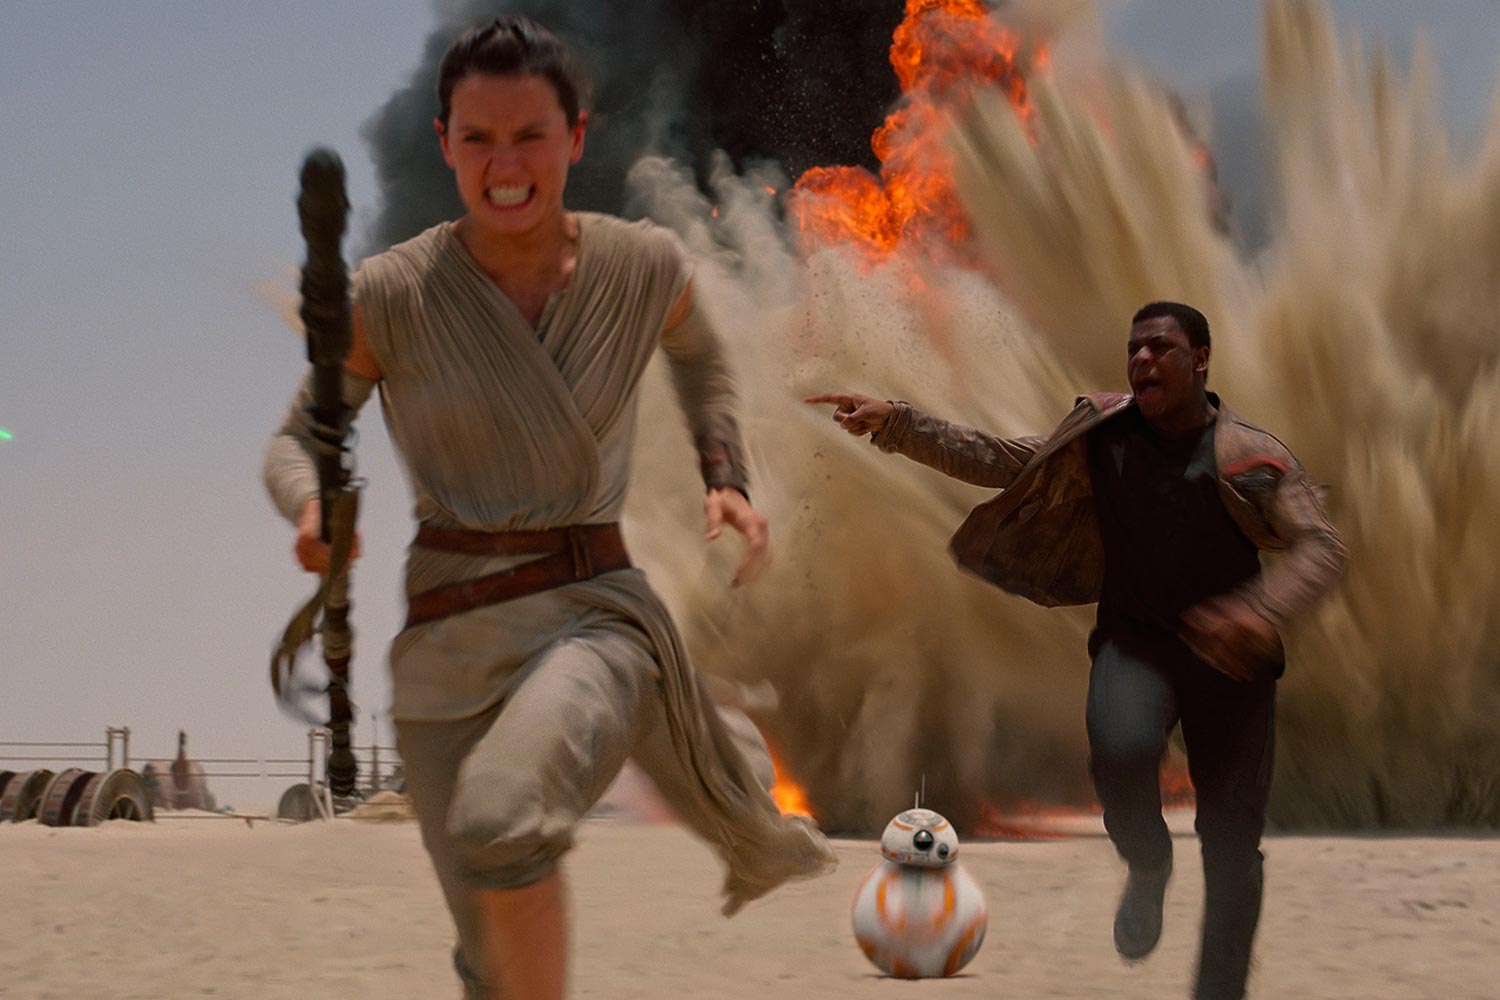 How to Watch All the Star Wars Movies in Order and Not Bore Your Kids